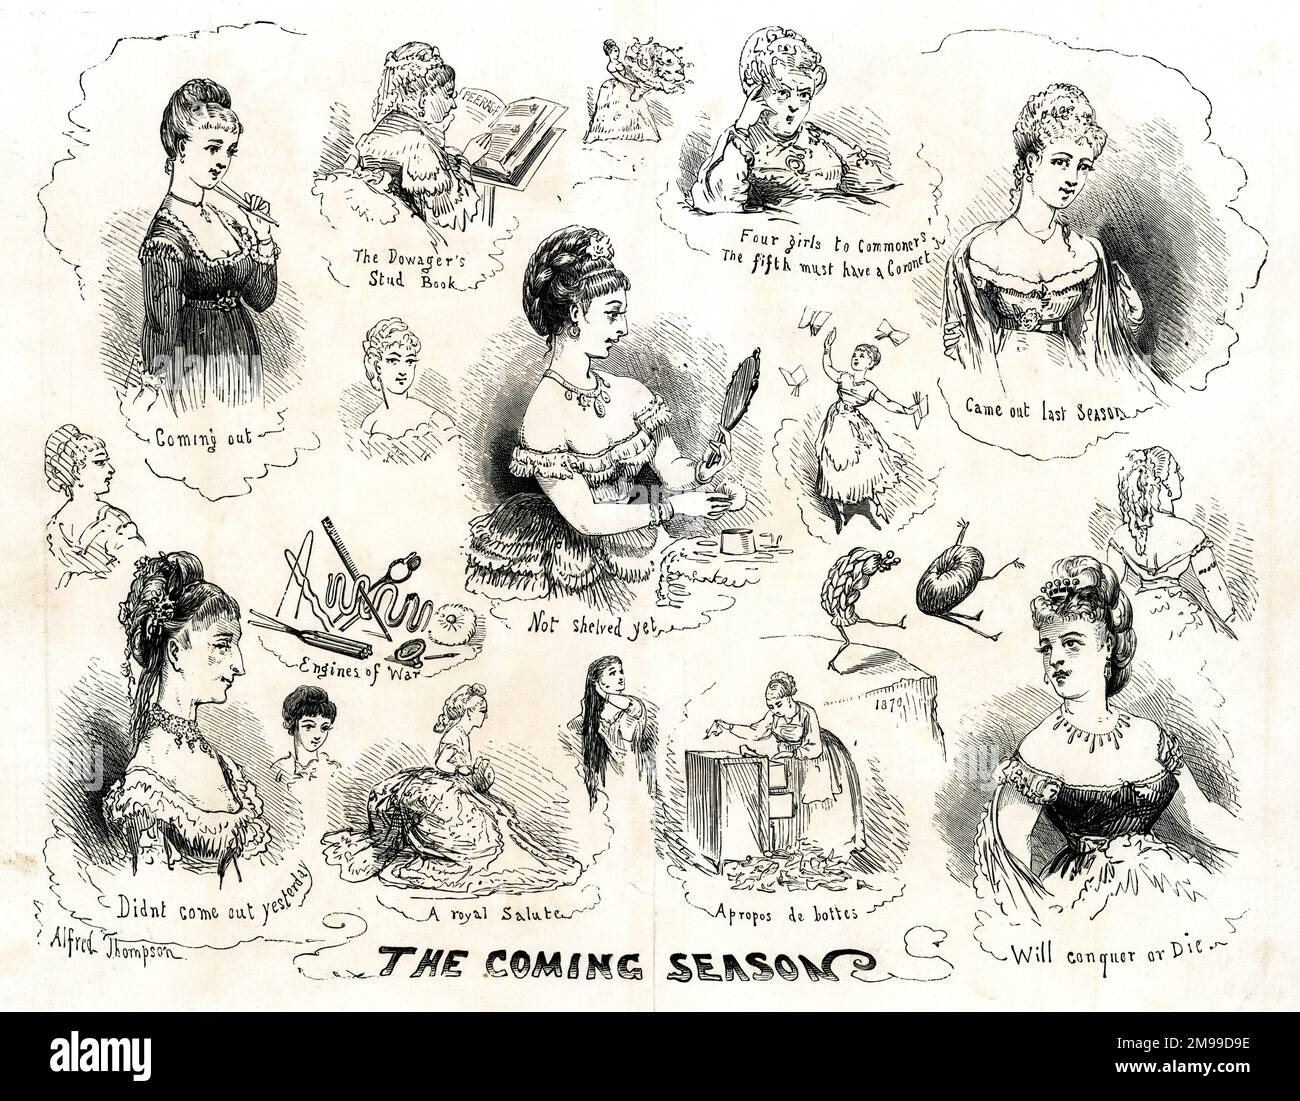 Cartoon, The Coming Season - debutantes getting ready for all the social events. Stock Photo